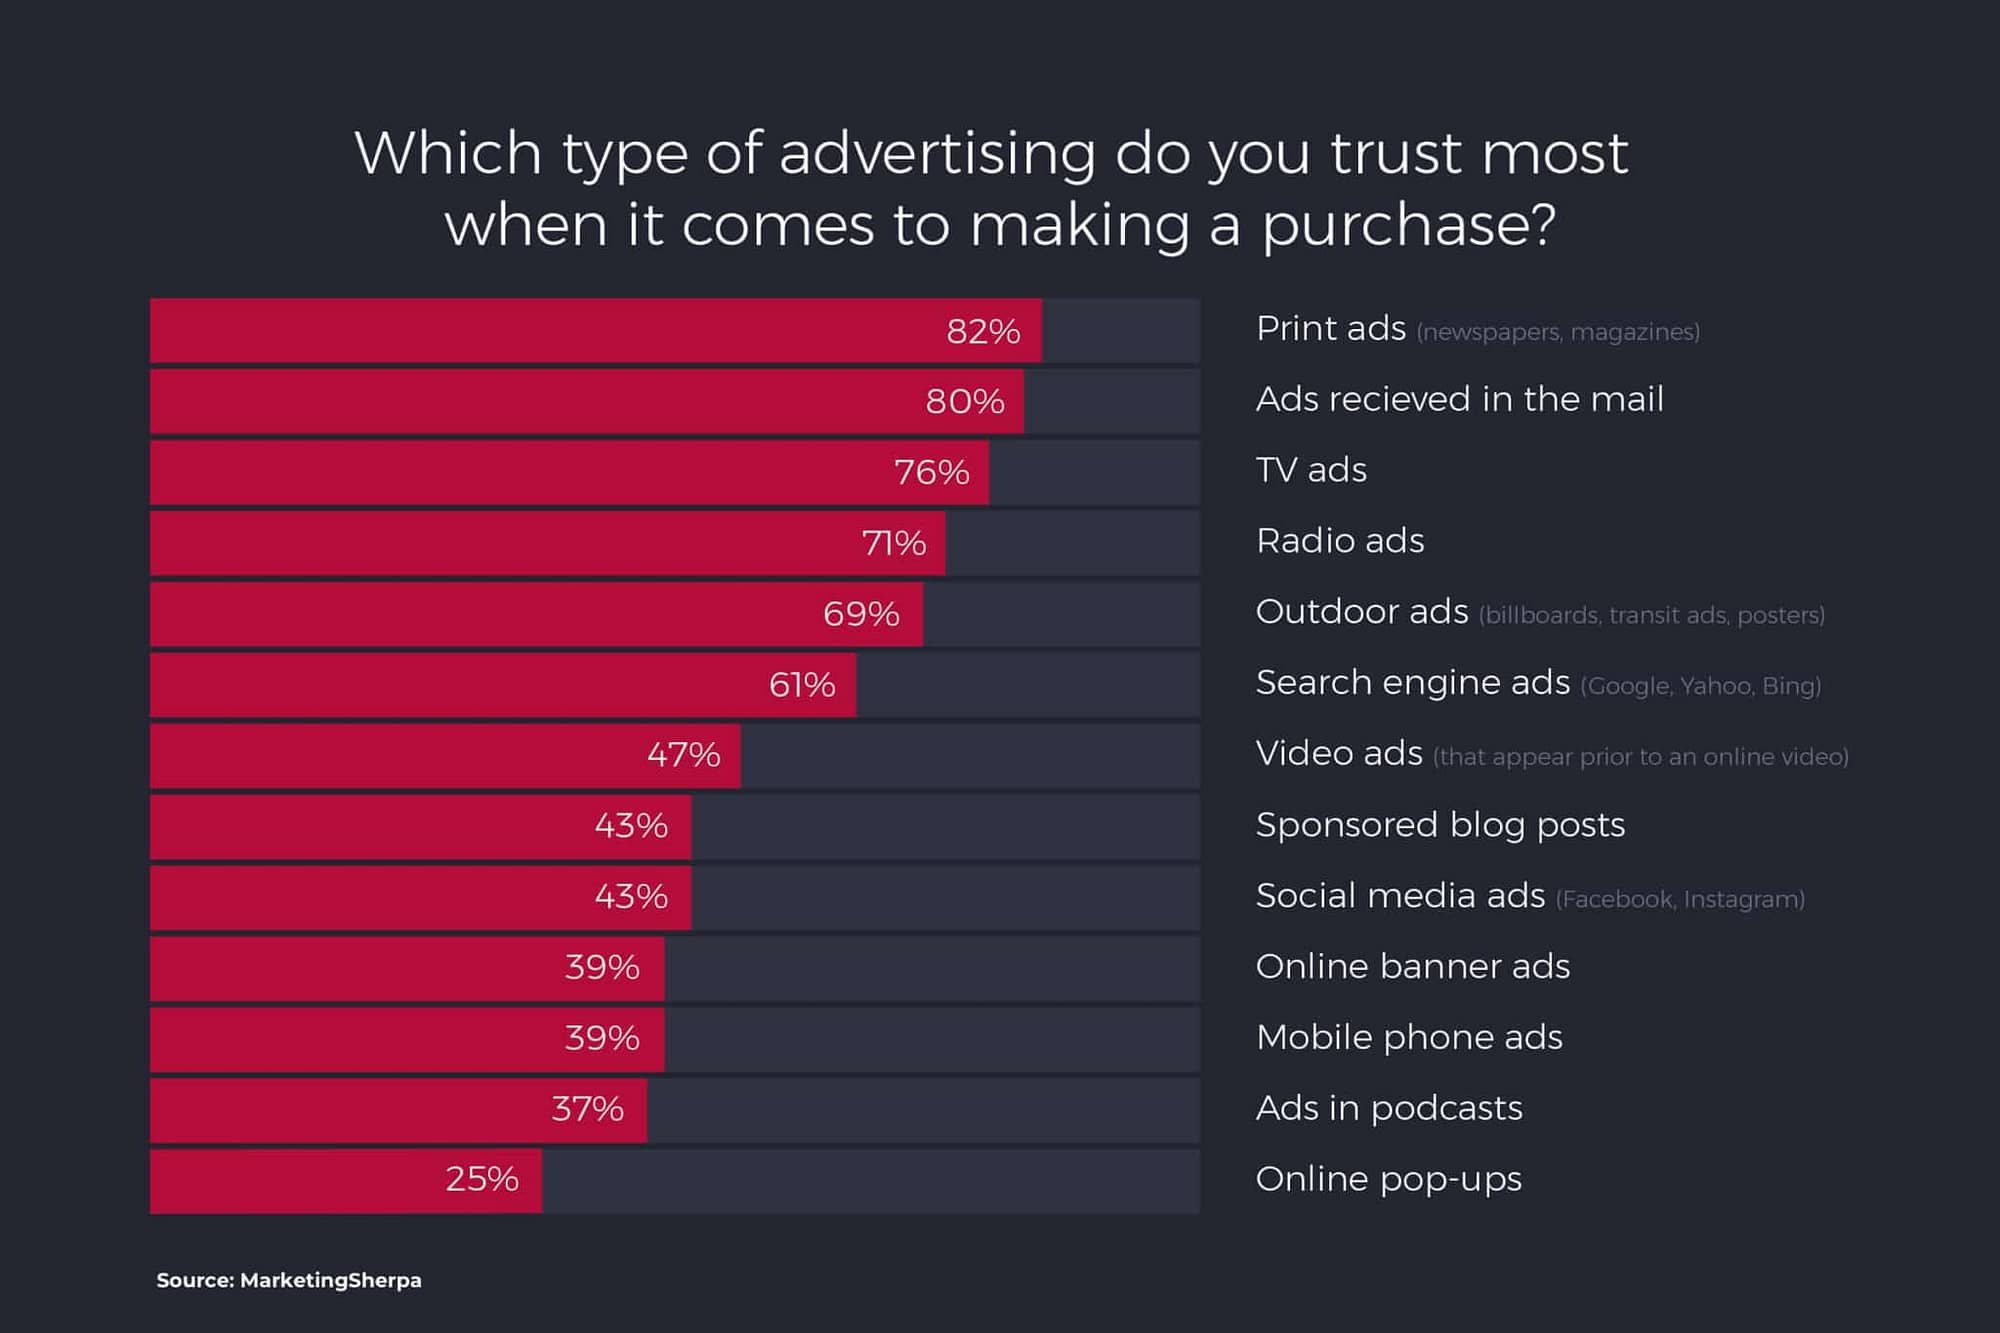 types of advertising trusted most